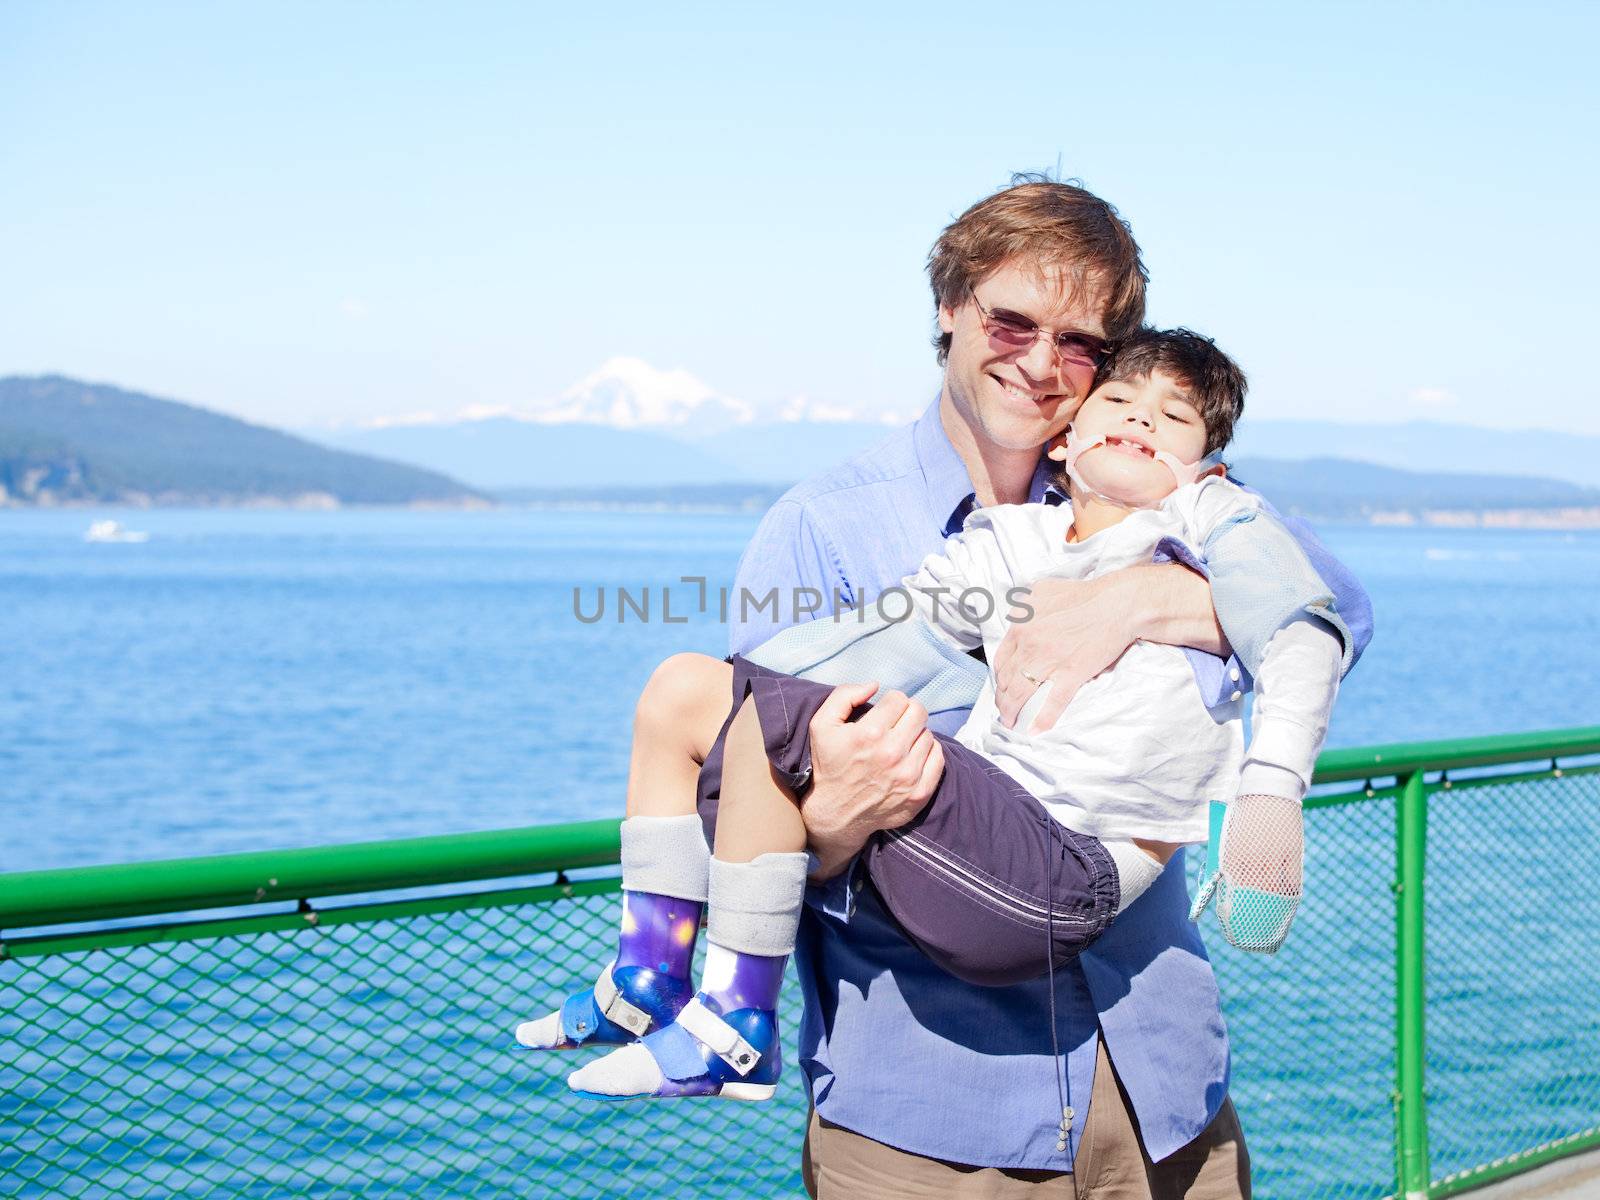 Father holding disabled son in arms on deck of ferry boat. Puget Sound in background. Child has cerebral palsy.